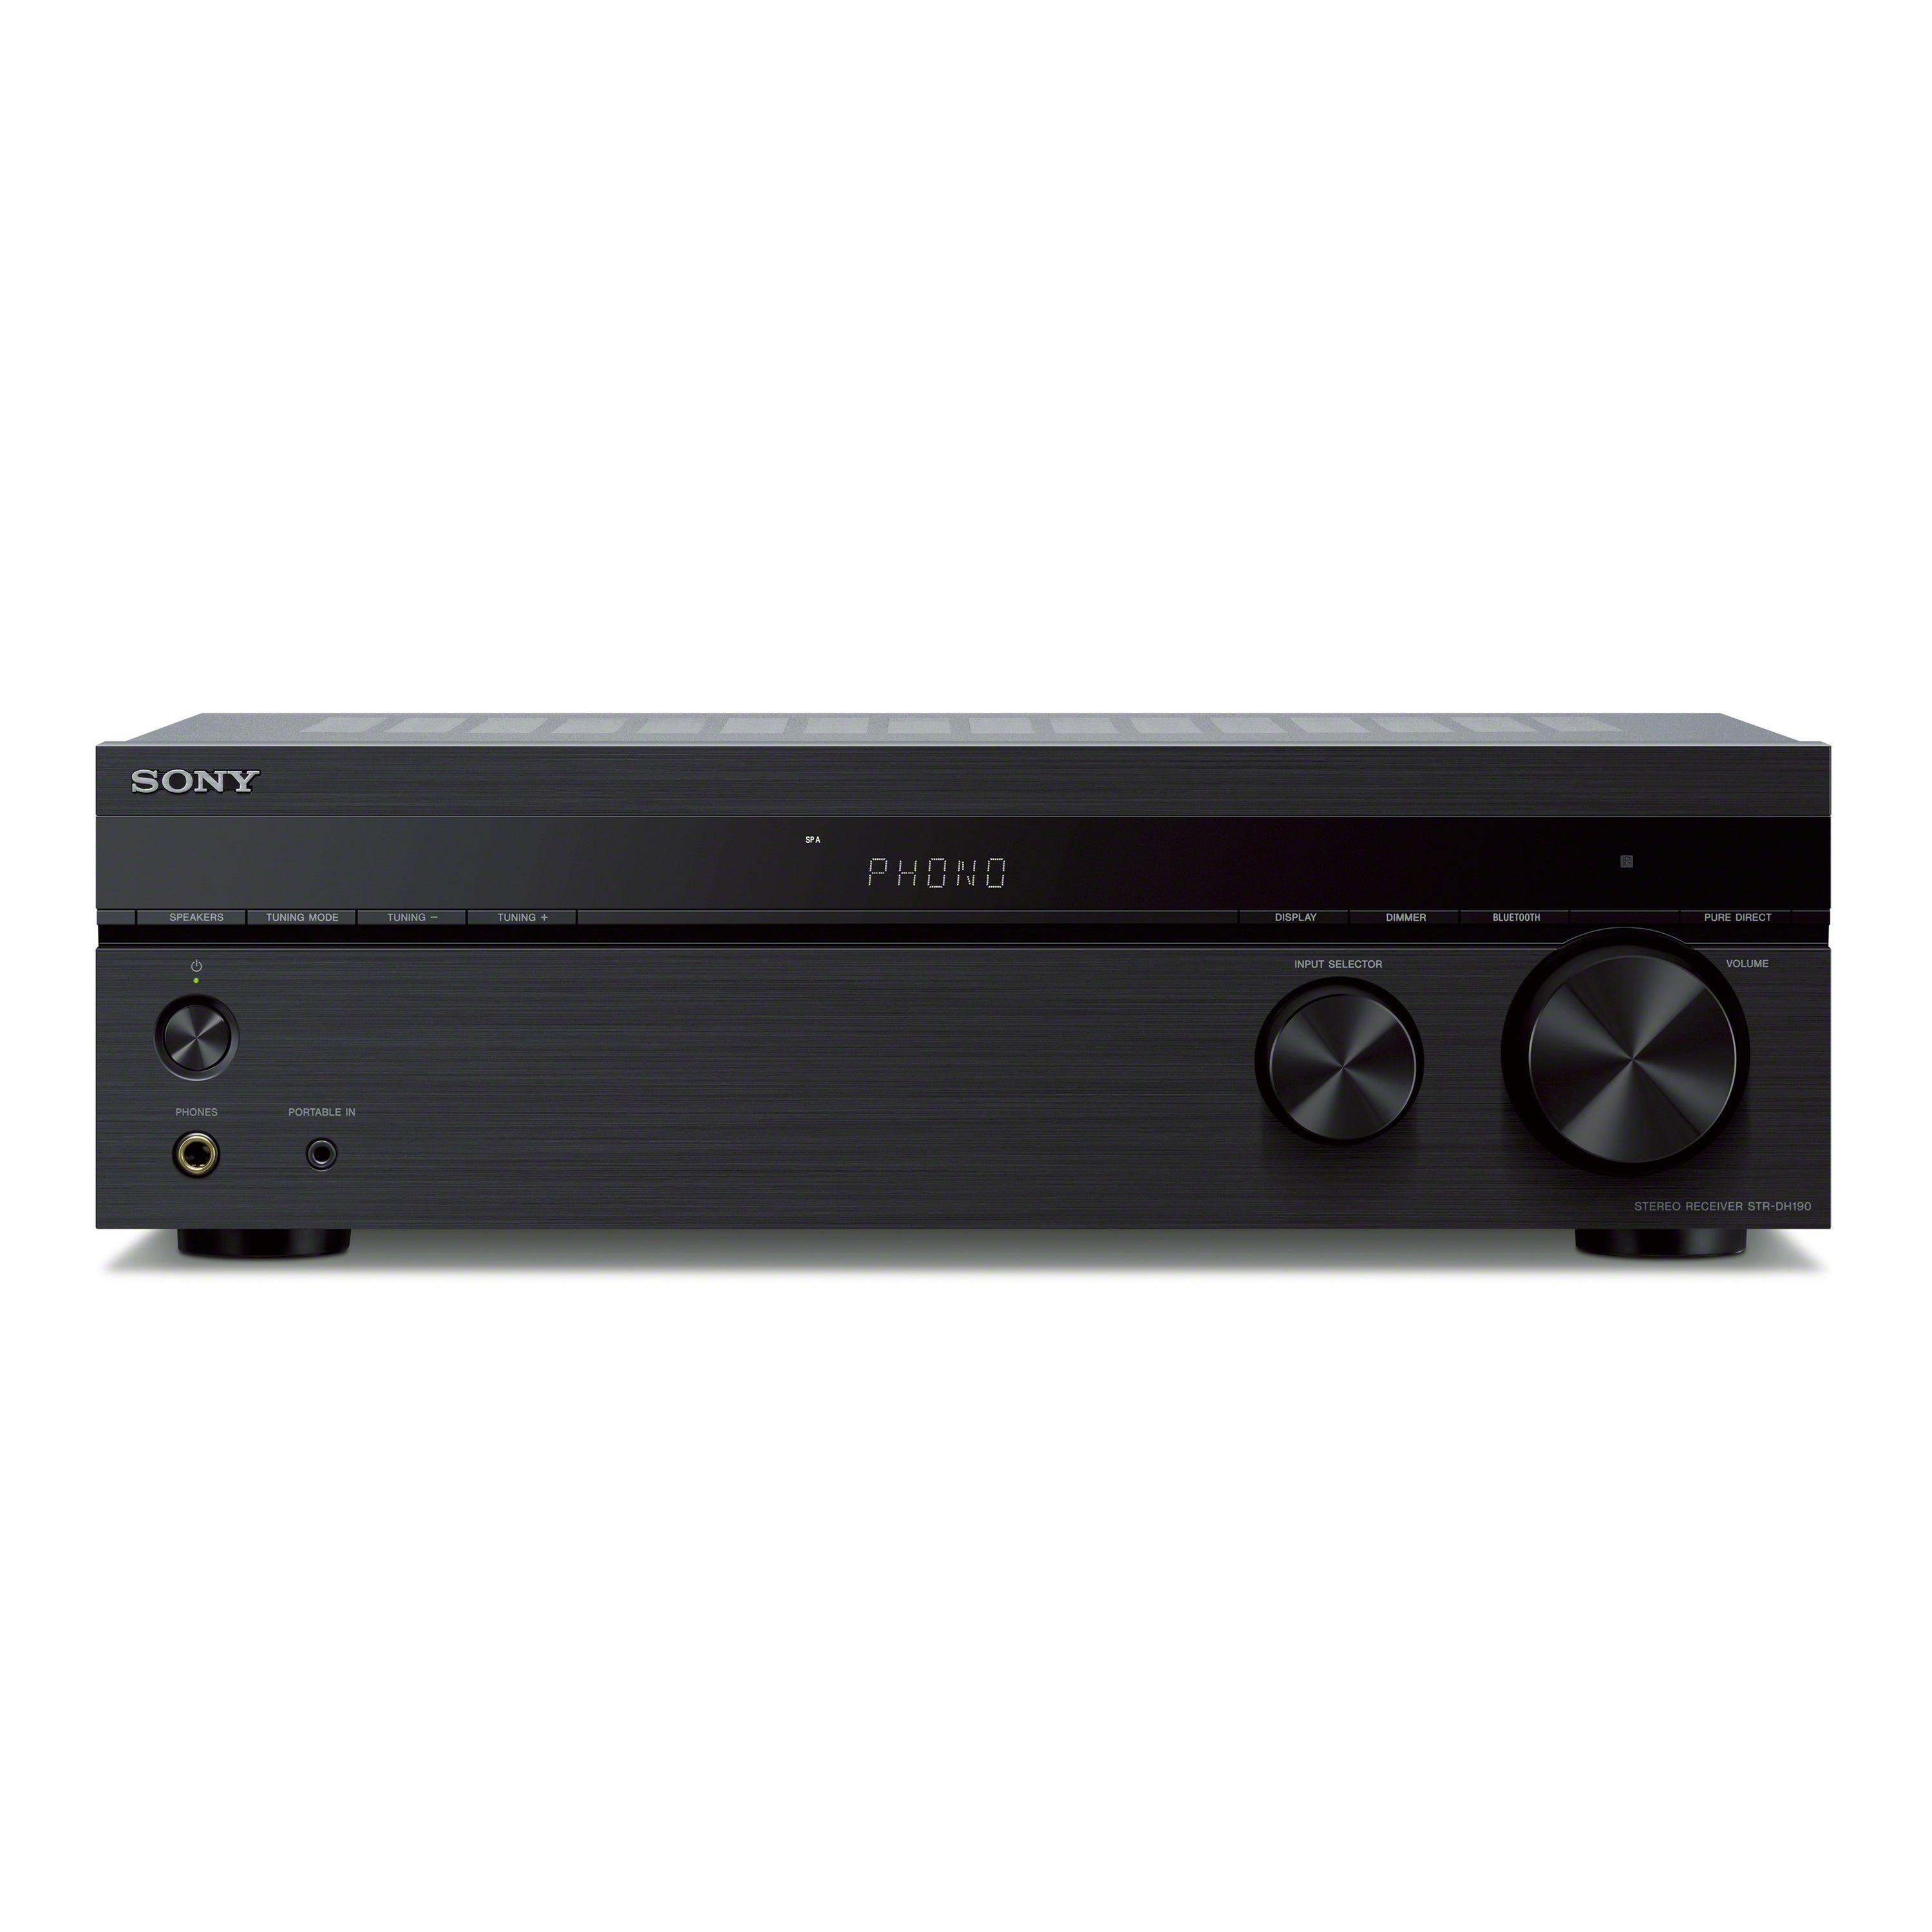 Stereo Receiver Phono Input and Bluetooth® Connectivity   STR DH